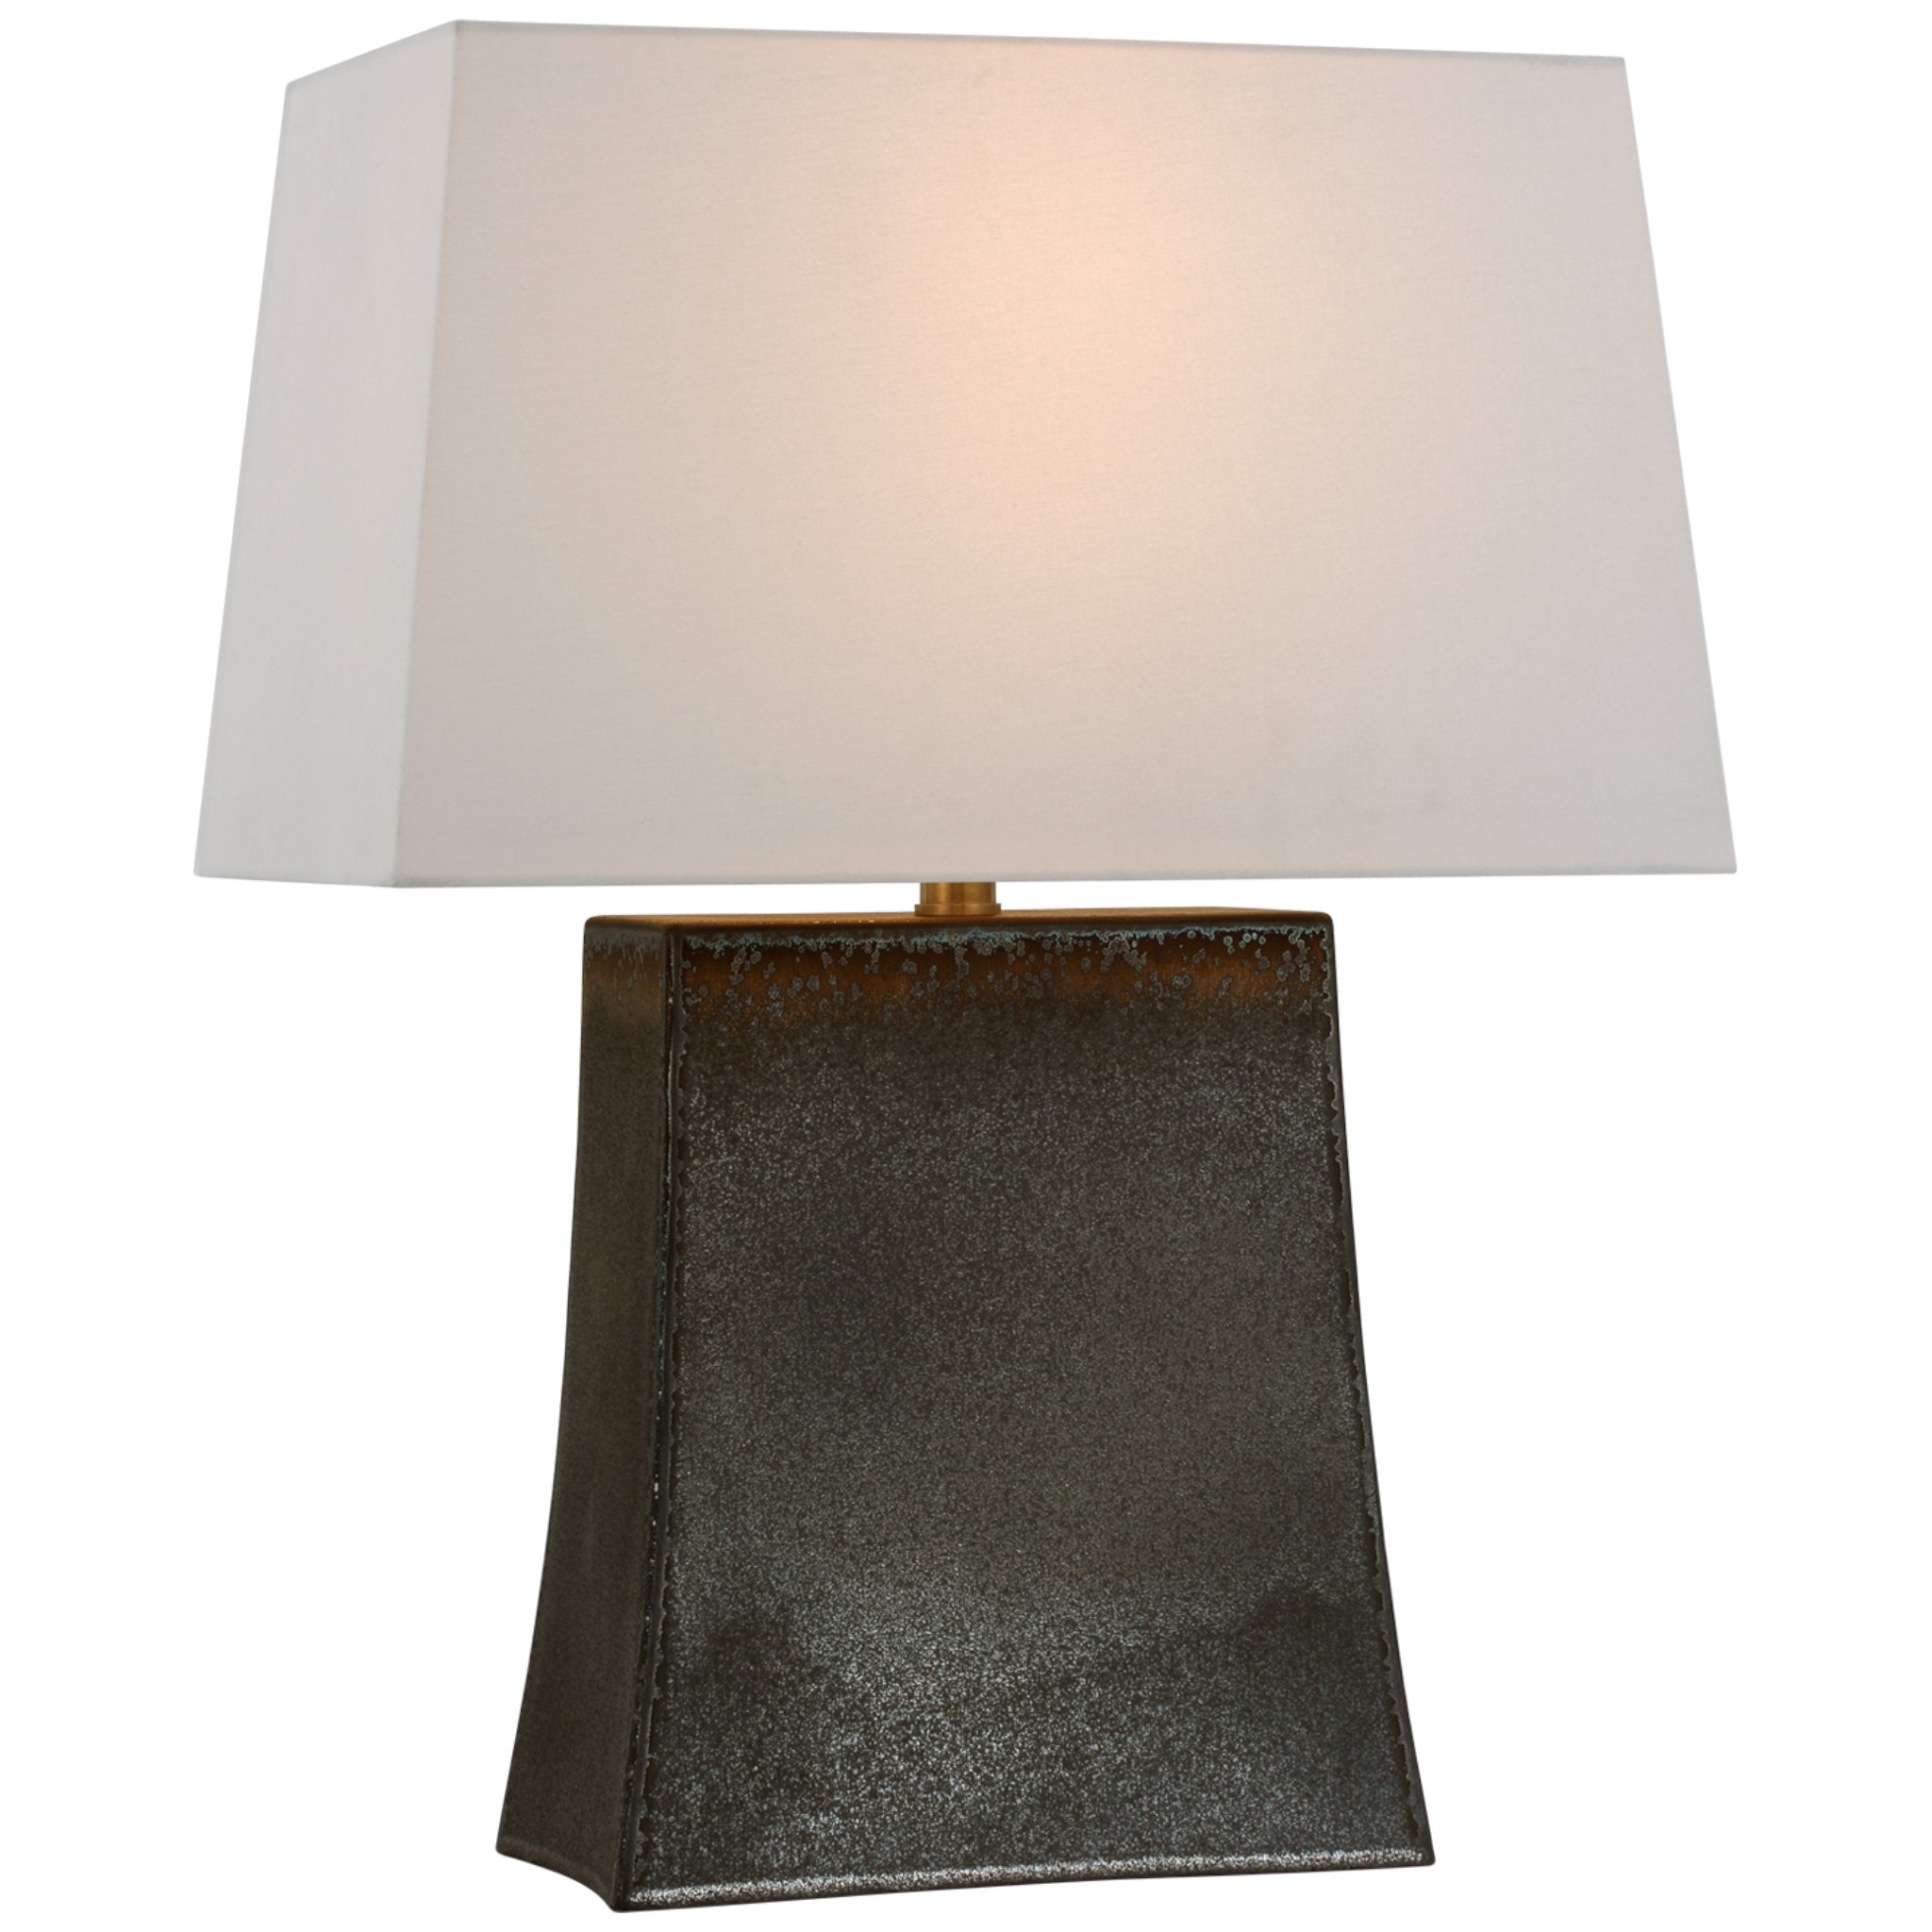 Chapman & Myers Lucera Medium Table Lamp in Stained Black Metallic with Linen Shade